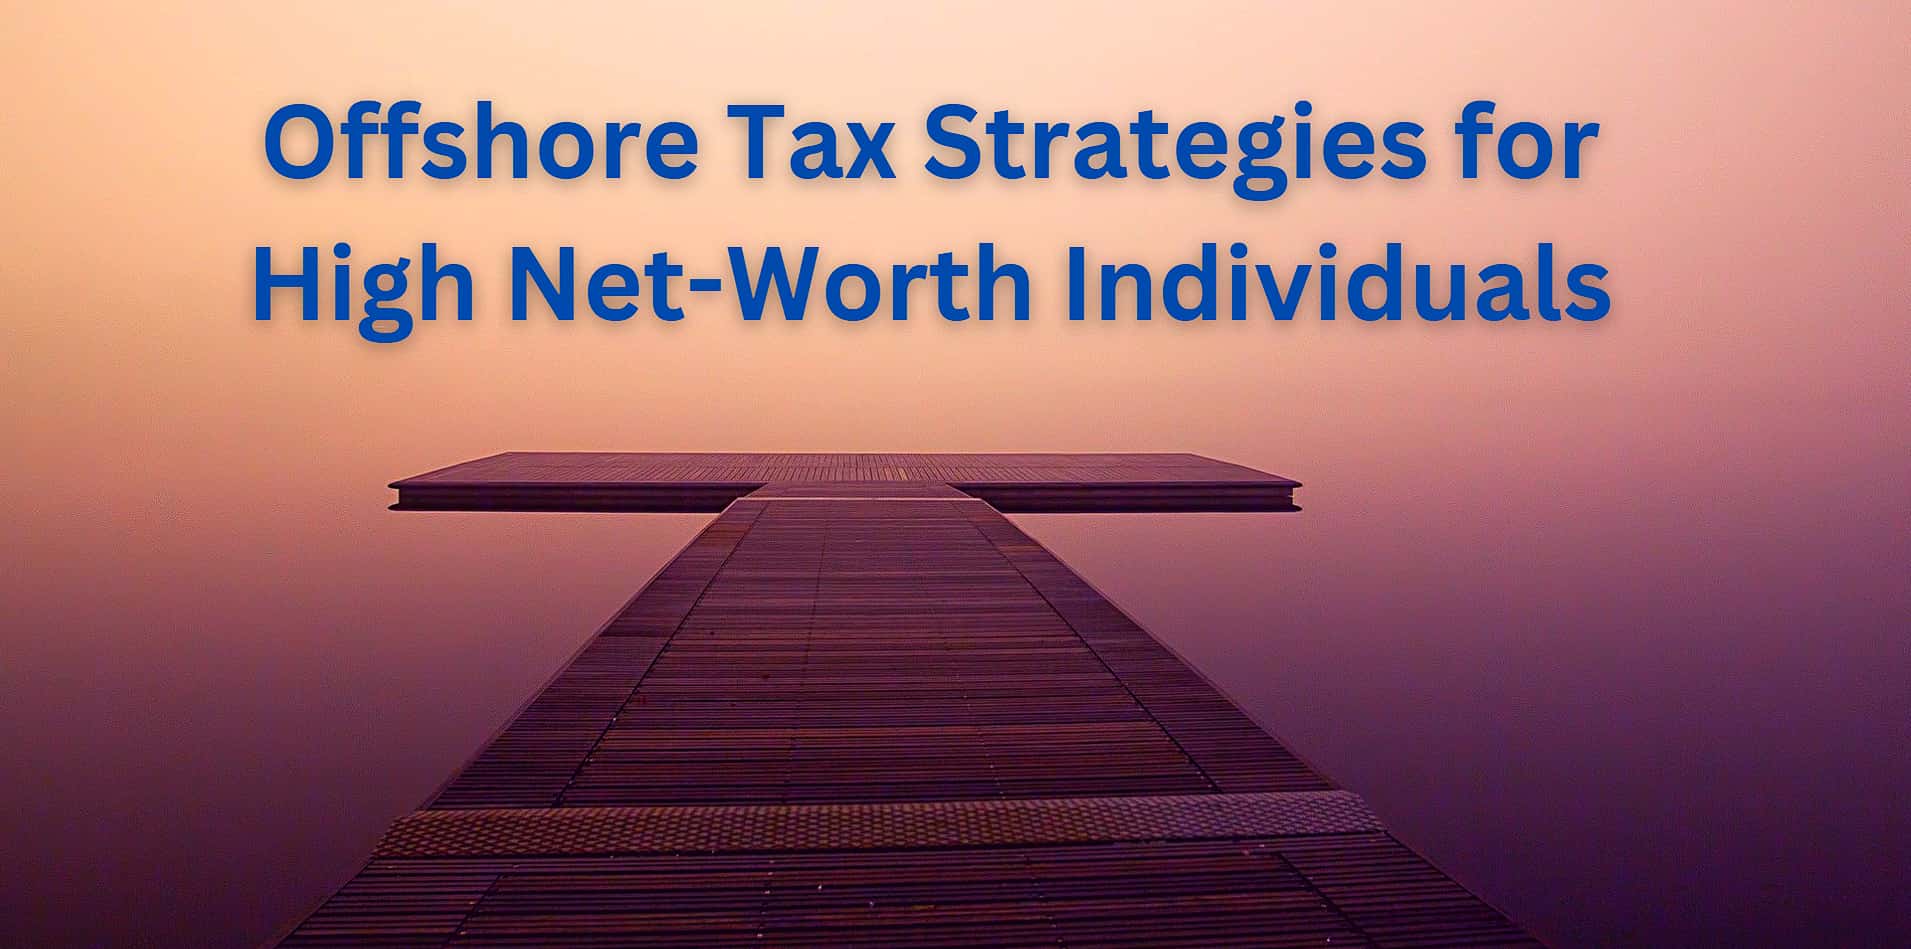 Proven Offshore Tax Strategies for High Net-Worth Individuals